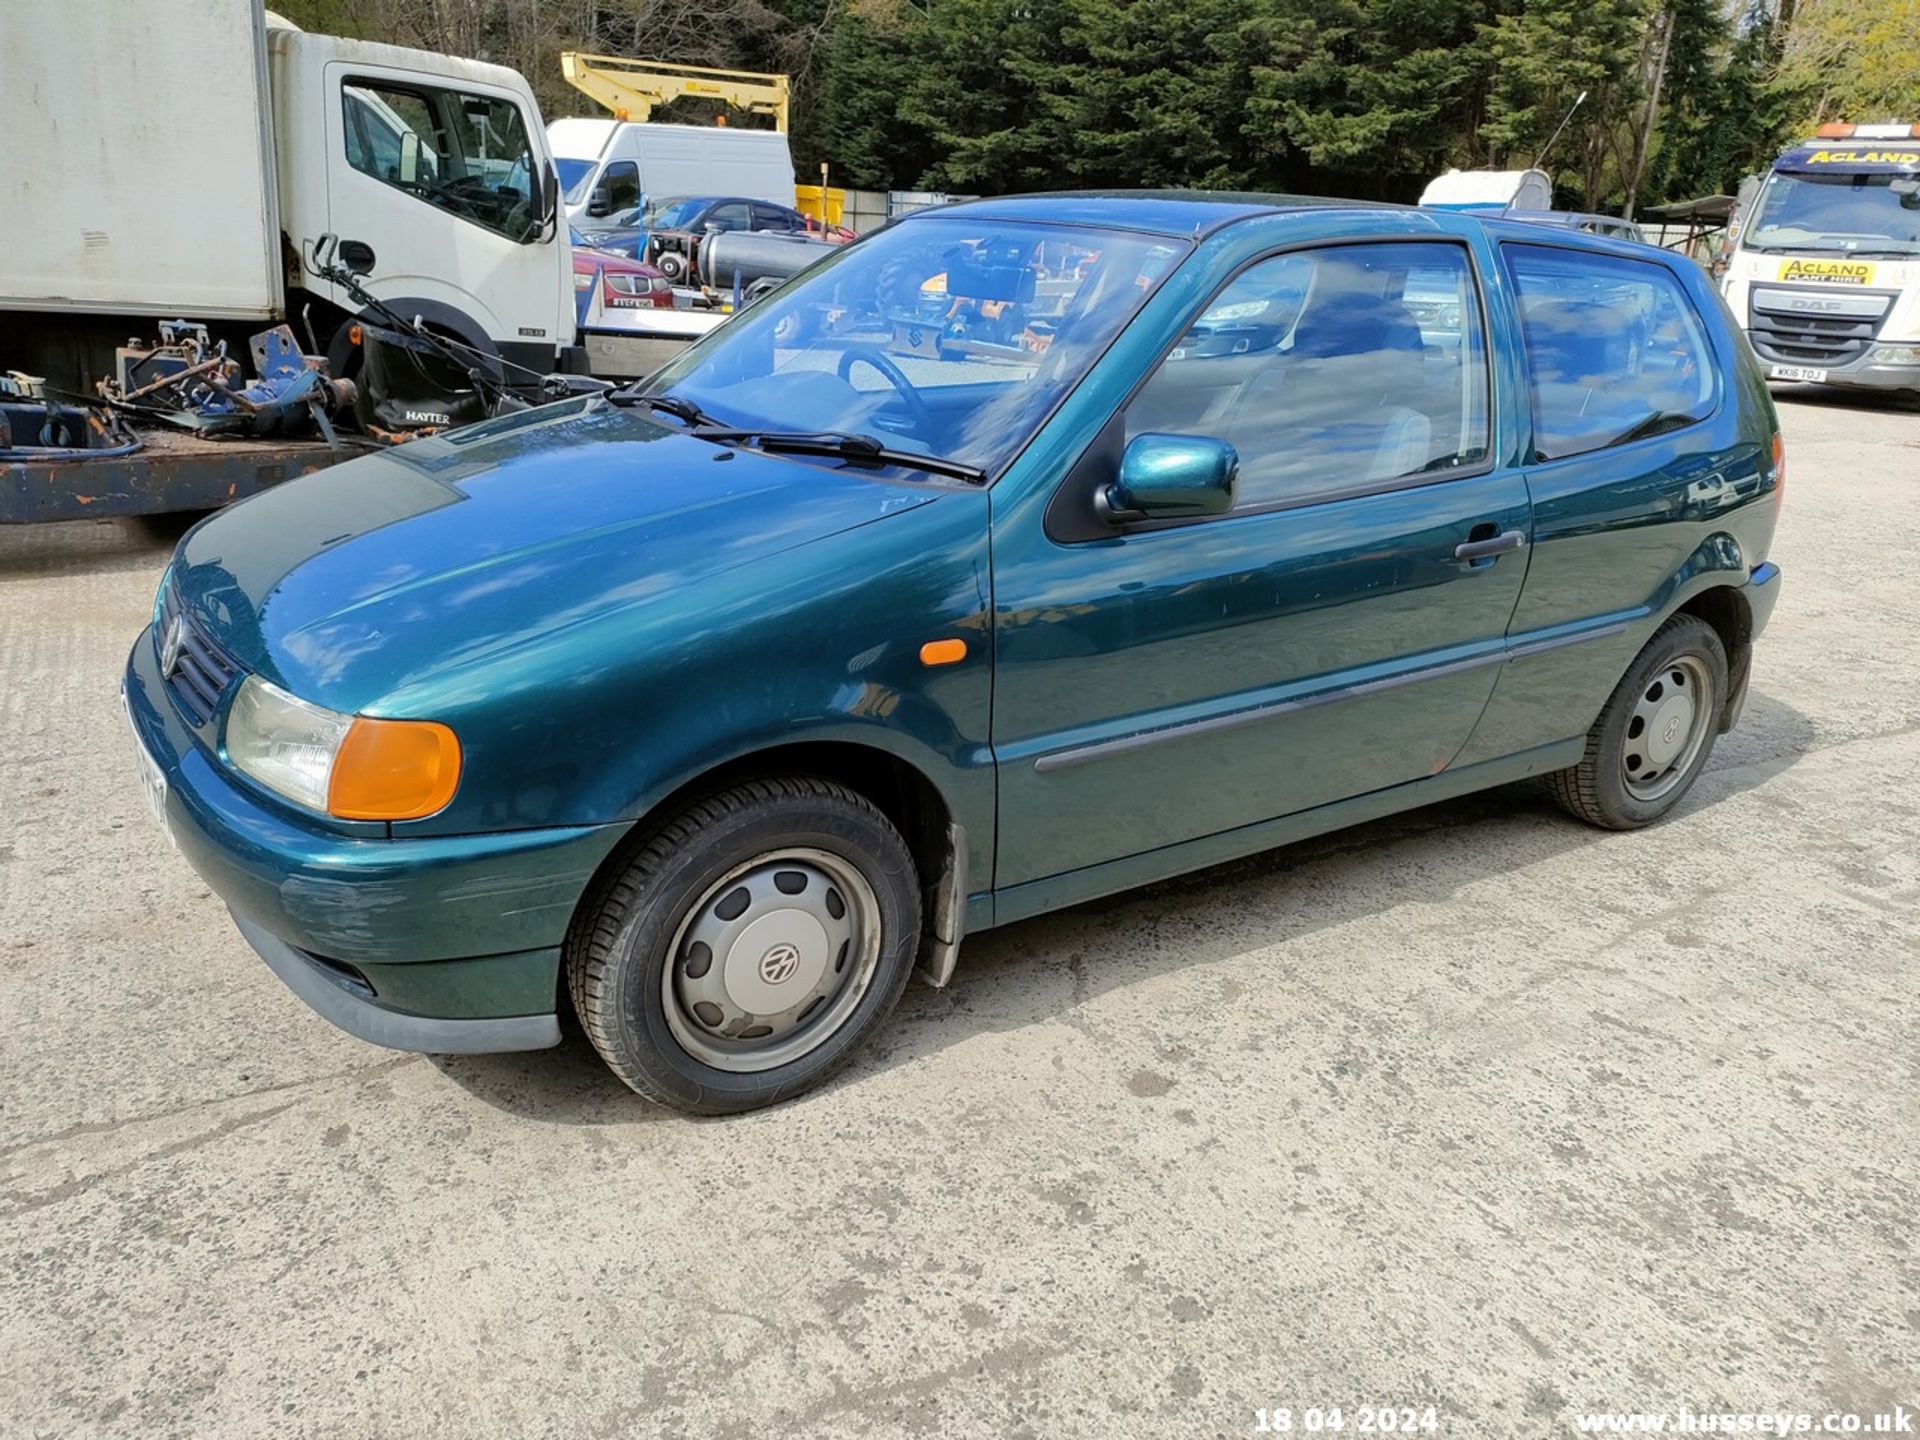 1997 VOLKSWAGEN POLO 1.4 CL AUTO - 1390cc 3dr Hatchback (Green, 68k) - Image 16 of 60